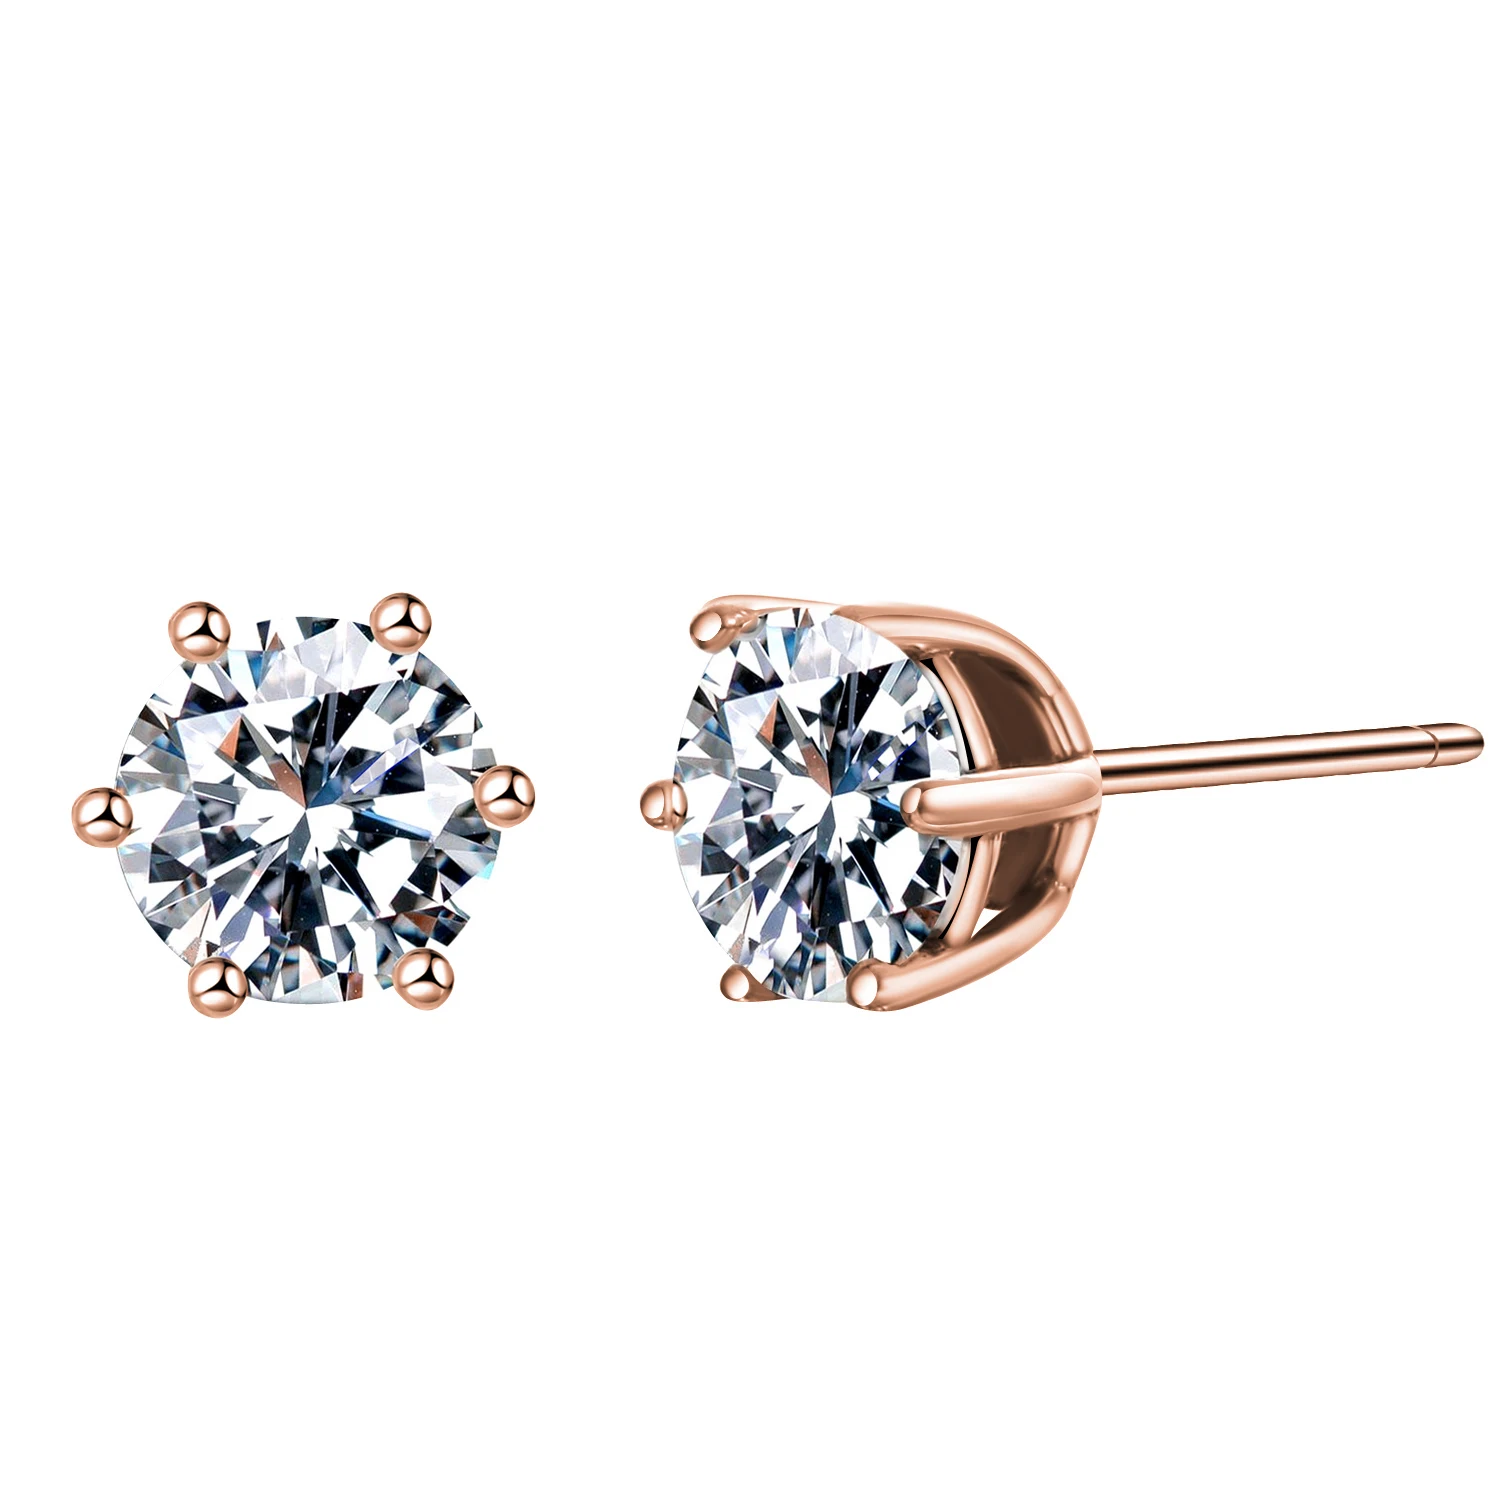 

eManco 3mm 14k Gold Plated Stainless Steel Zircon Stud Earring, Picture shows